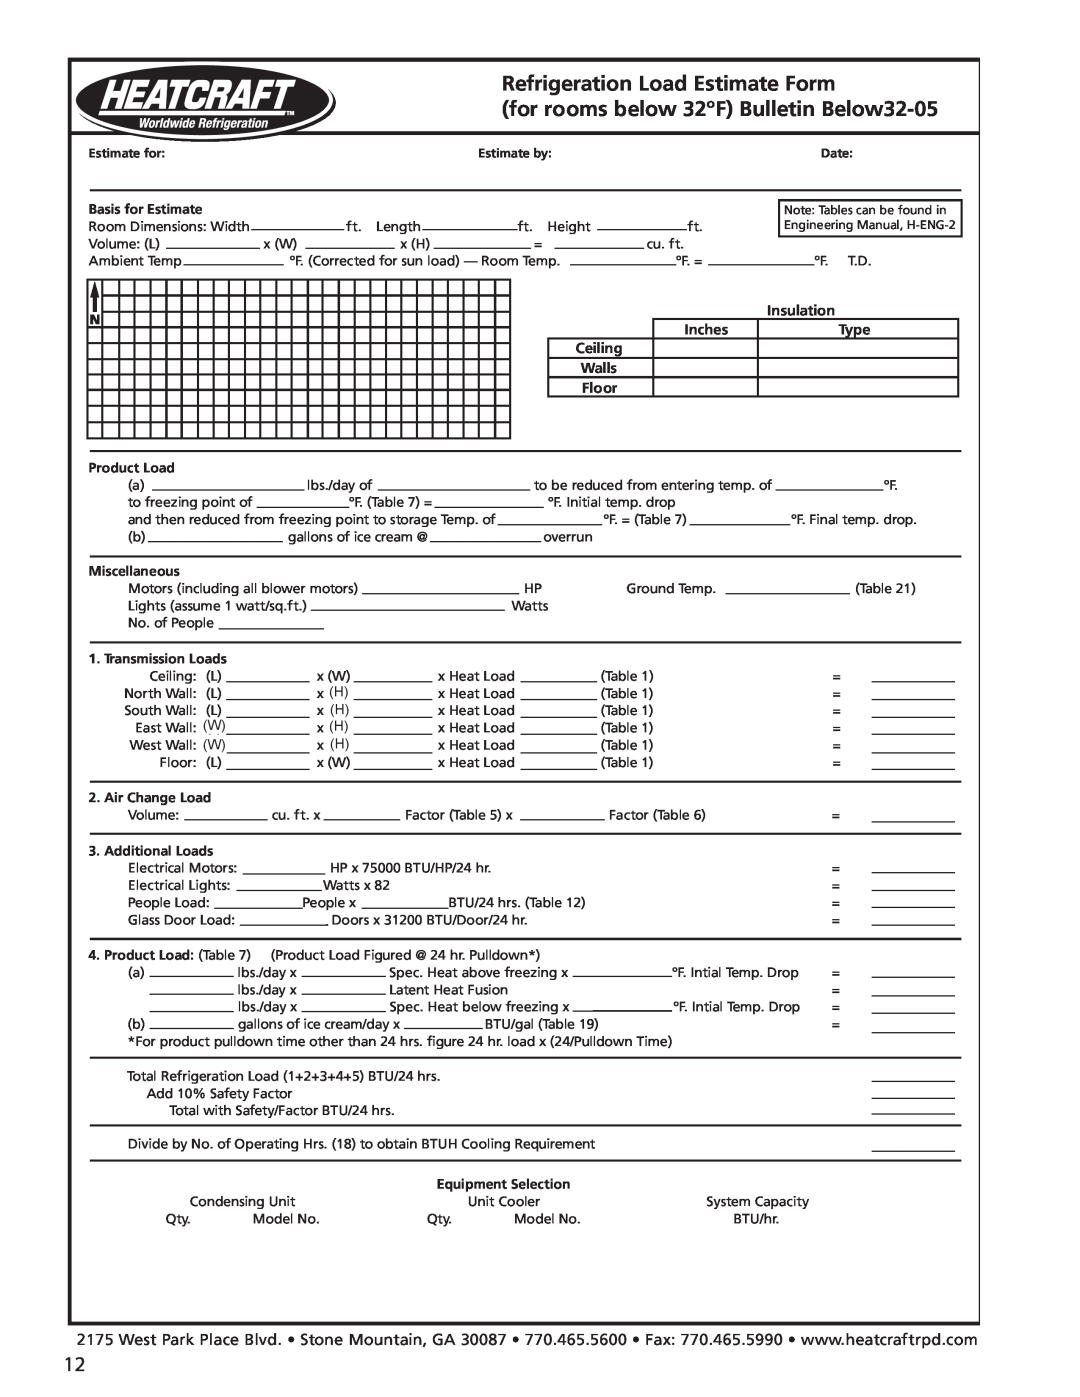 Heatcraft Refrigeration Products H-ENGM0806 Refrigeration Load Estimate Form, for rooms below 32ºF Bulletin Below32-05 